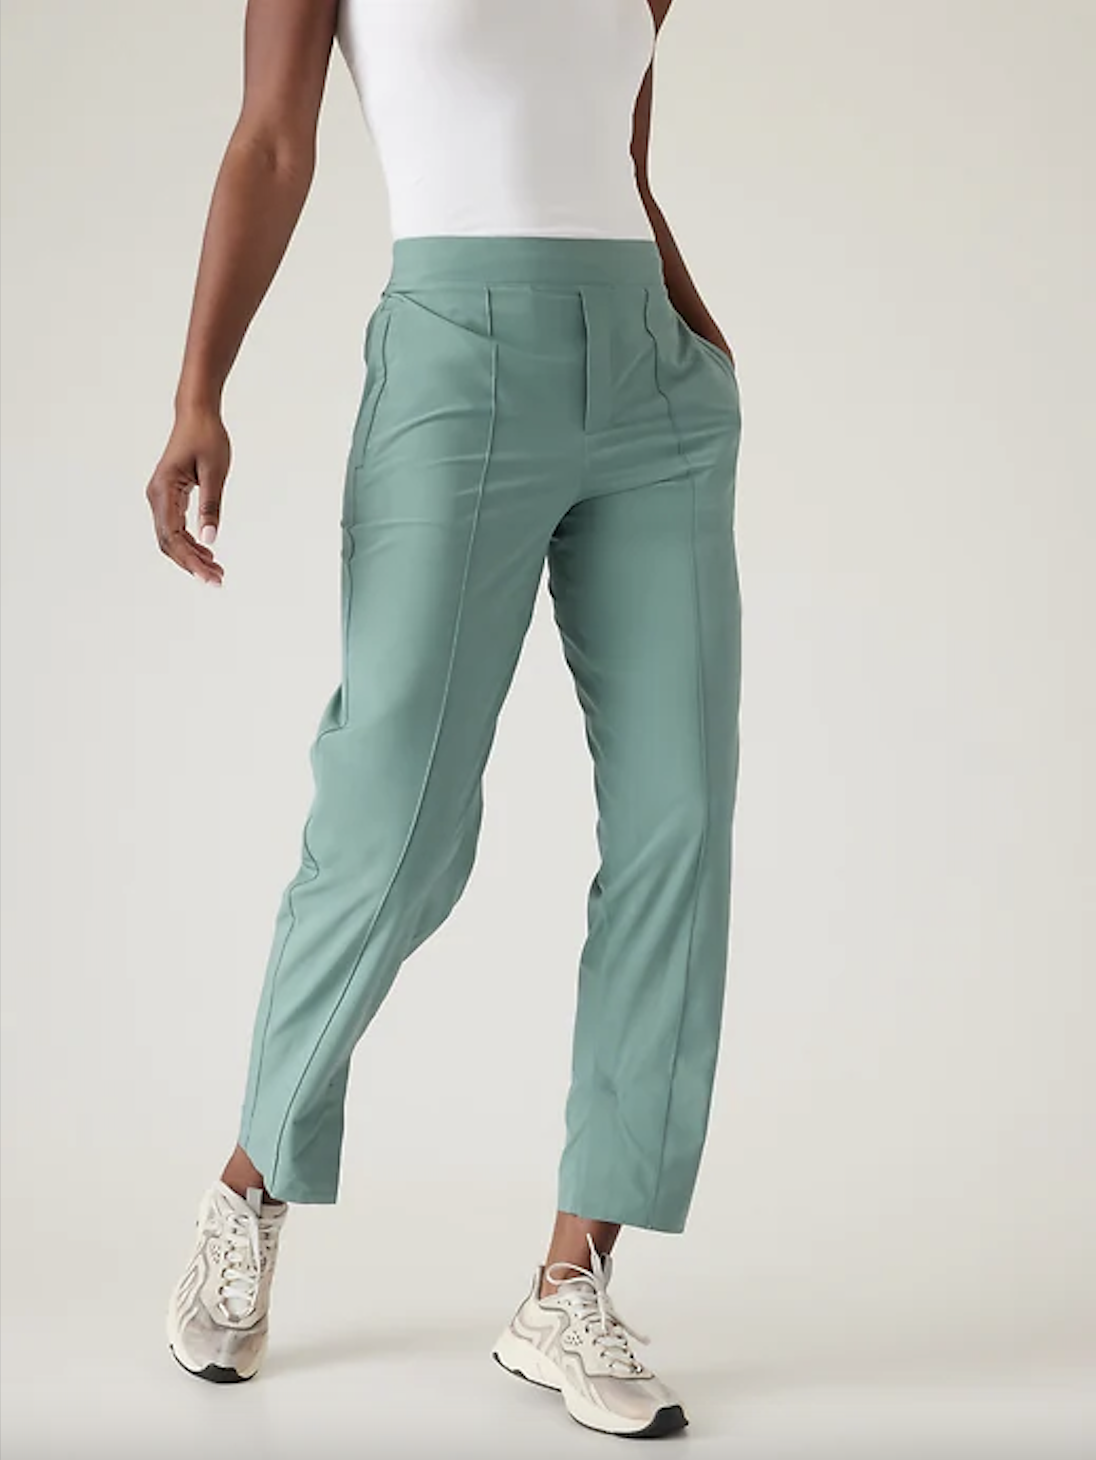 TopRated Work Pants on Amazon That Are Stylish Comfy  Affordable  E  Online